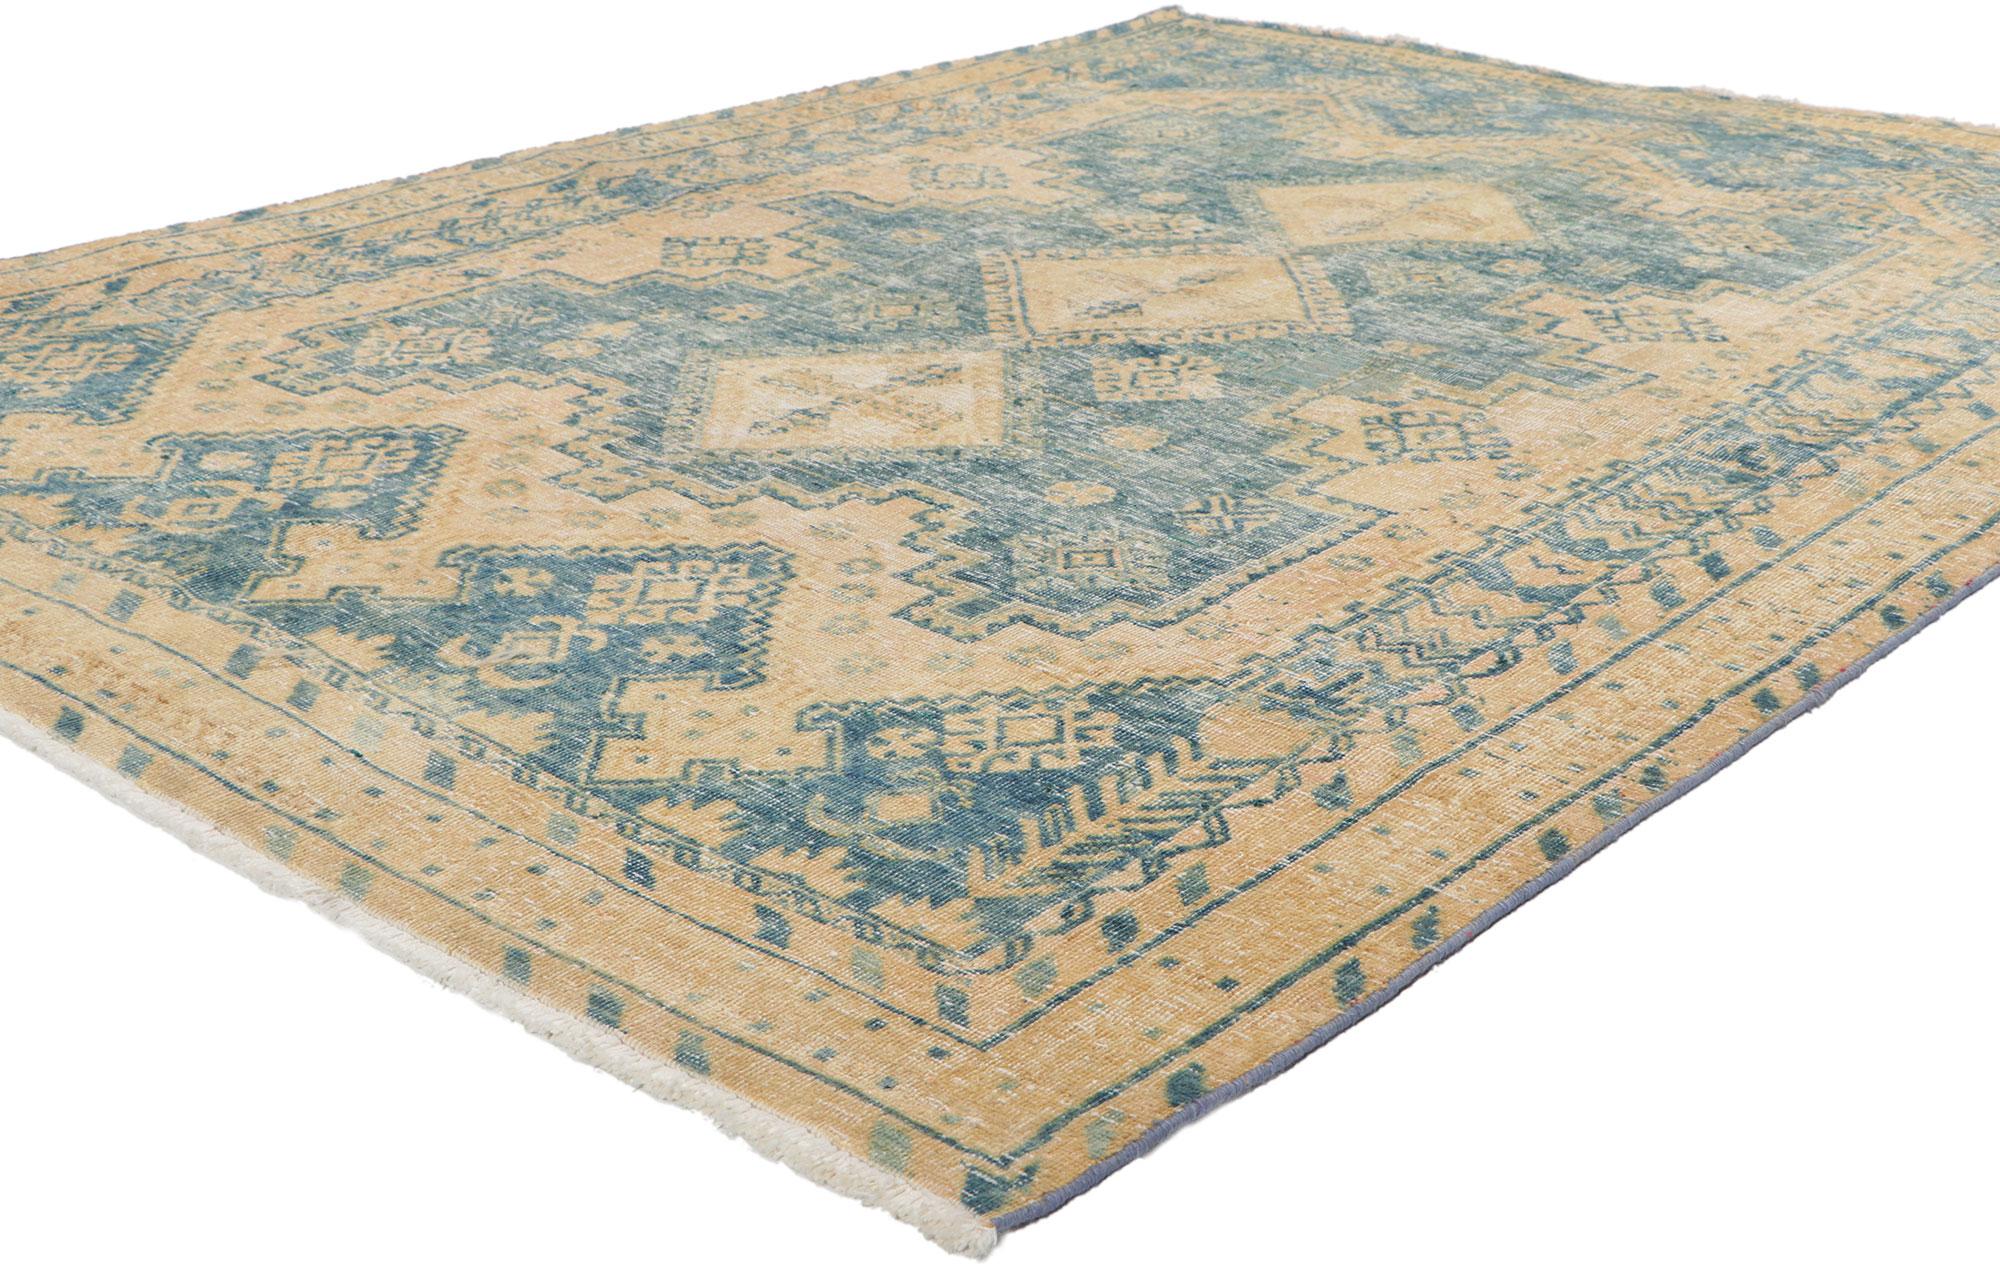 61121 Distressed Vintage Persian Viss Rug, 04'10 x 06'07.
Tribal mystique meets laid-back luxury in in this hand knotted wool distressed vintage Persian Viss rug. Let yourself be whisked away on a beguiling journey of enigmatic elegance, as you step